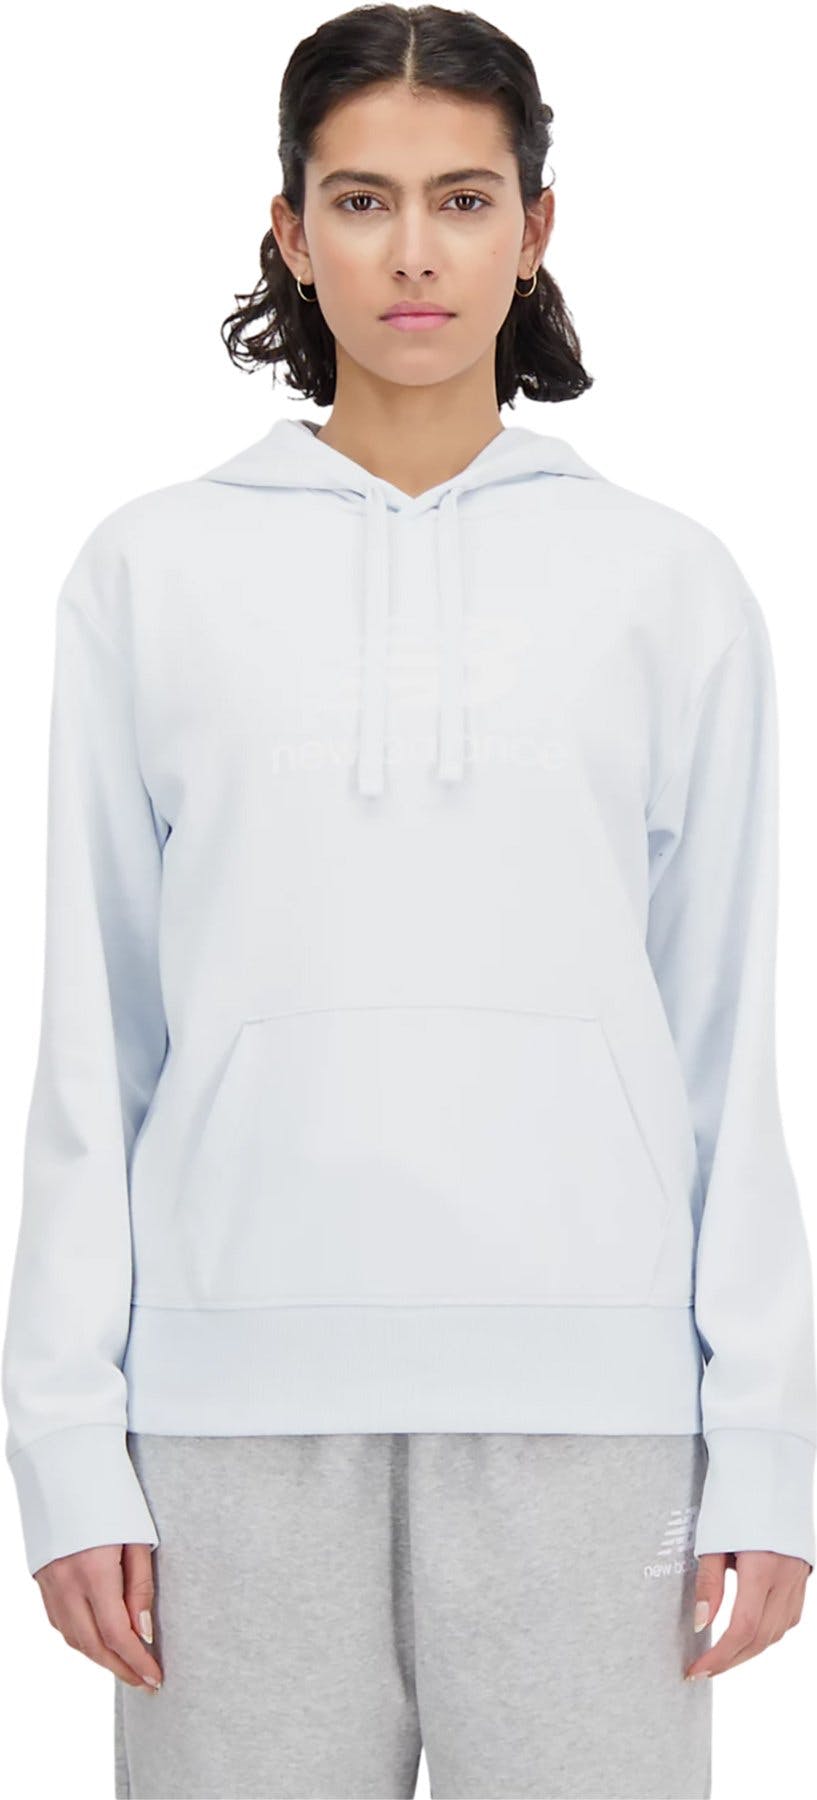 Product image for Essentials Stacked Logo French Terry Hoodie - Women's